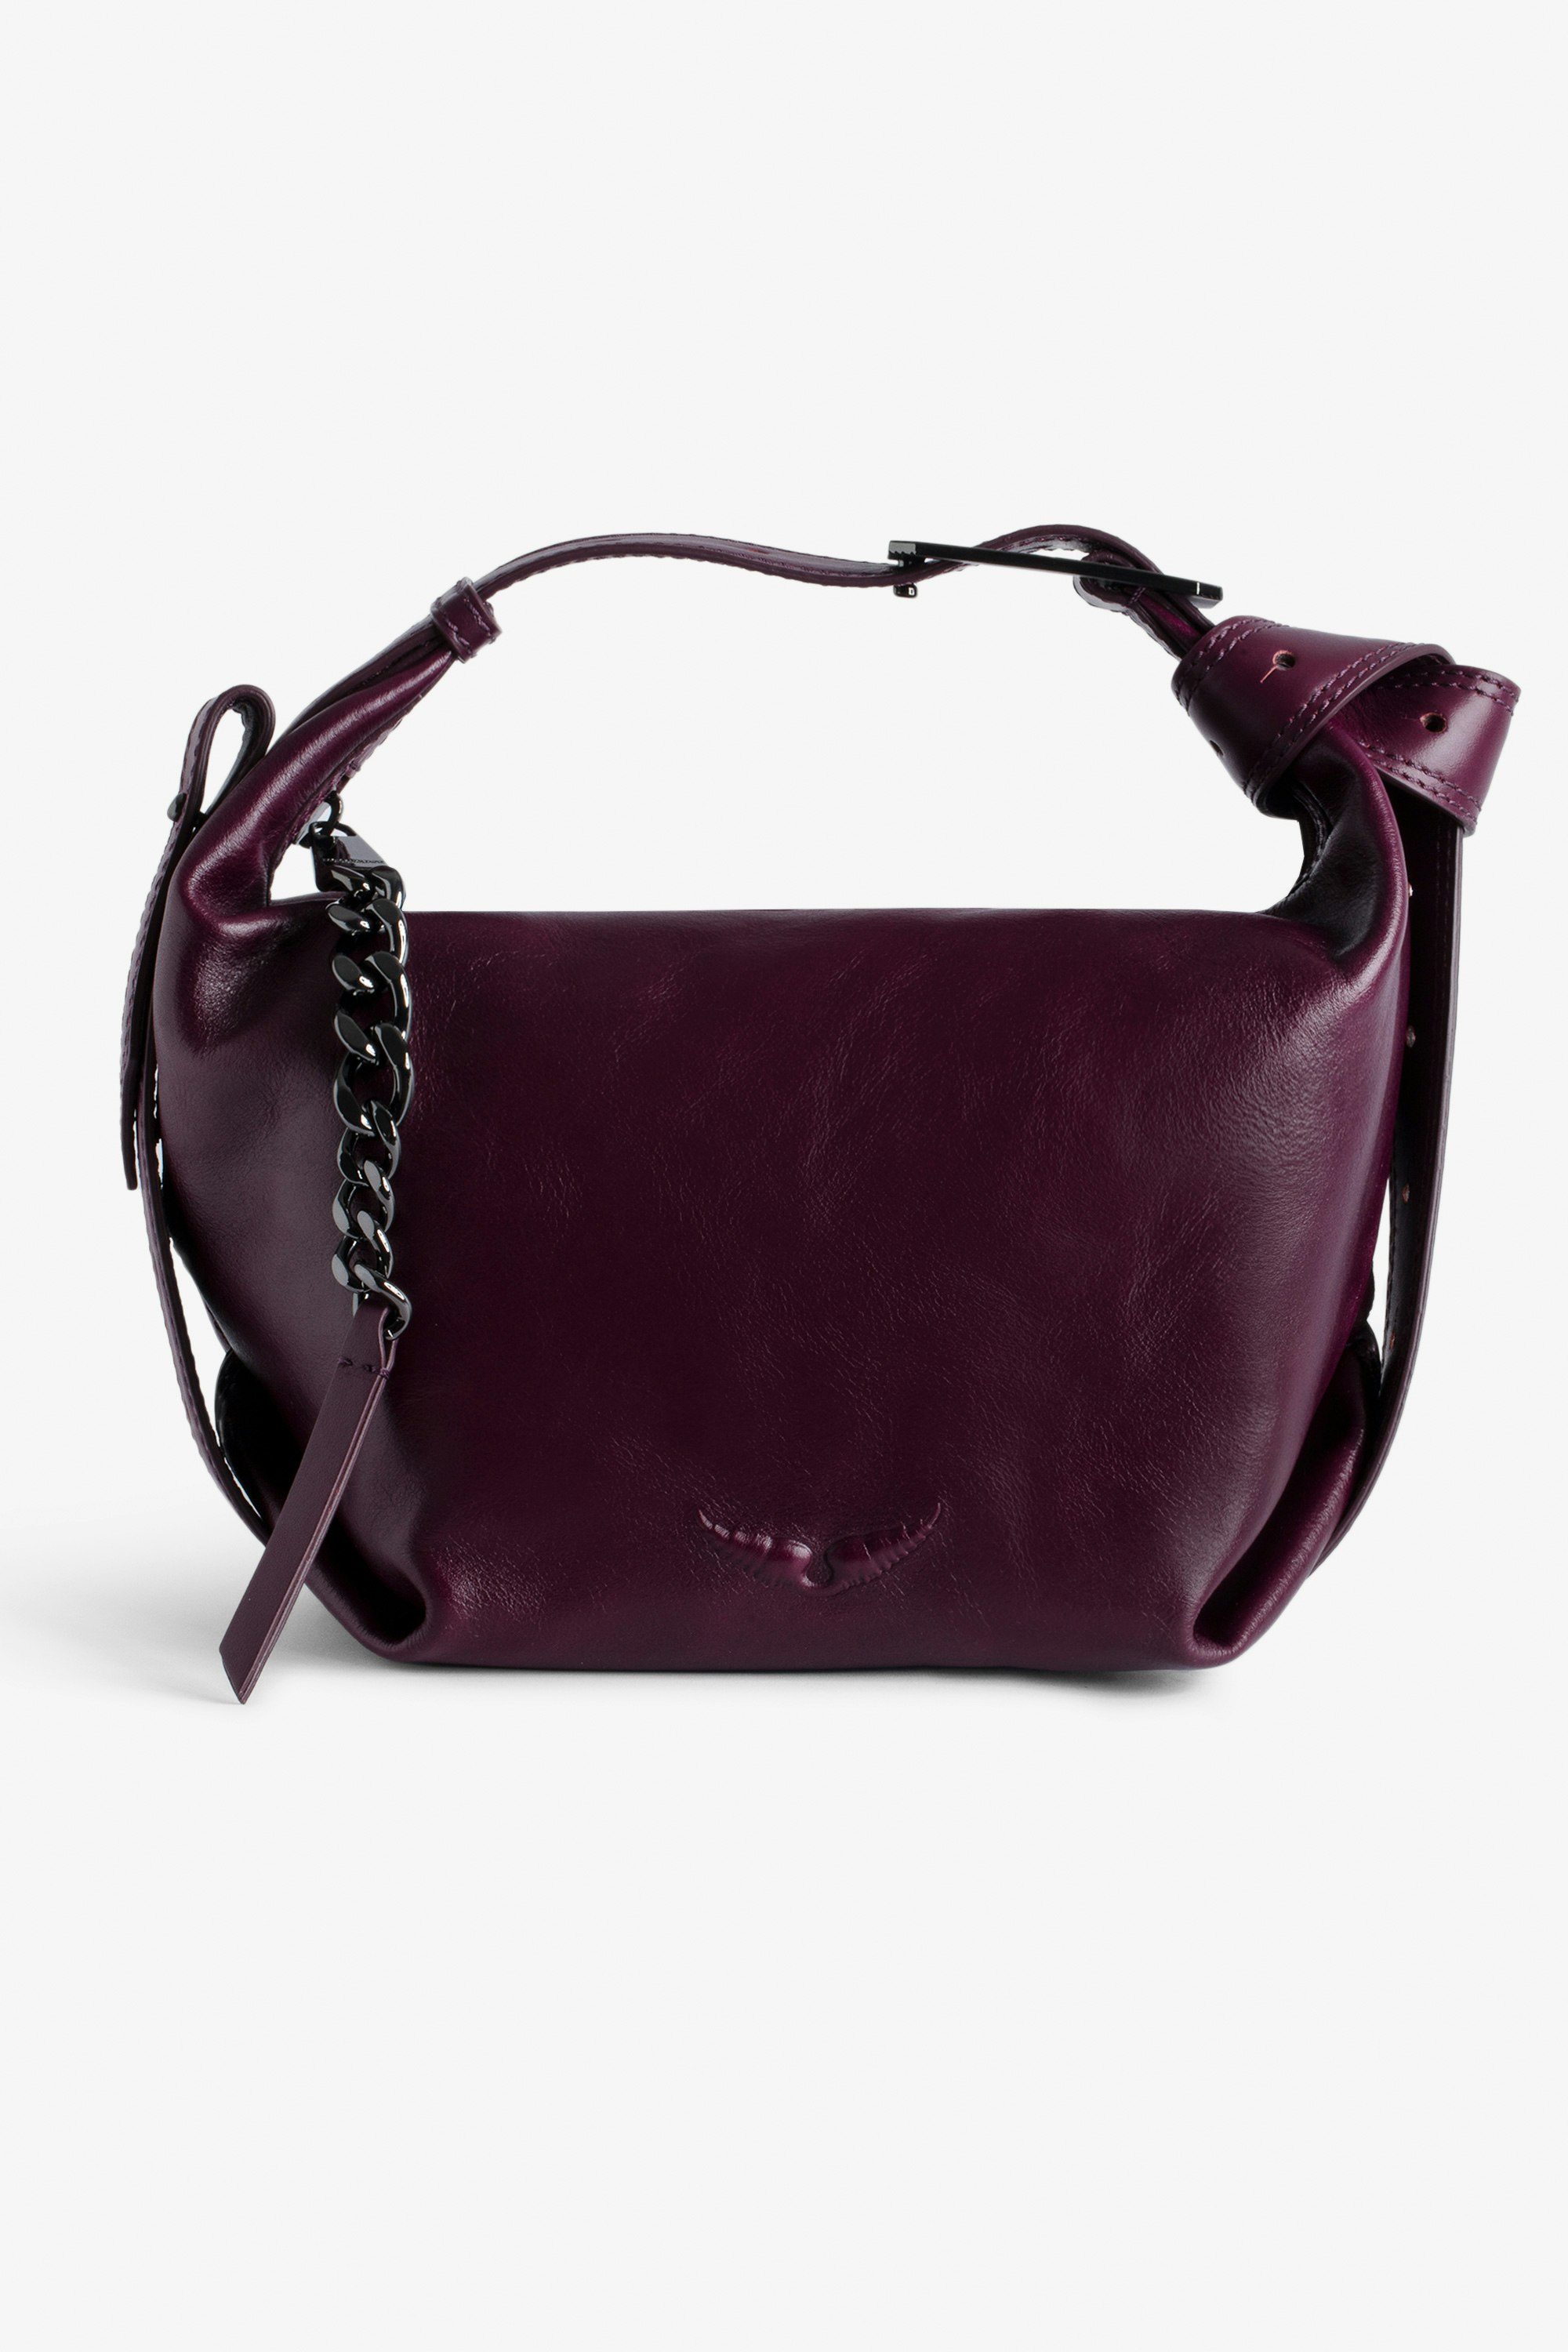 Le Cecilia Bag - Woman’s burgundy vegetable-tanned leather bag with shoulder strap and metal C buckle